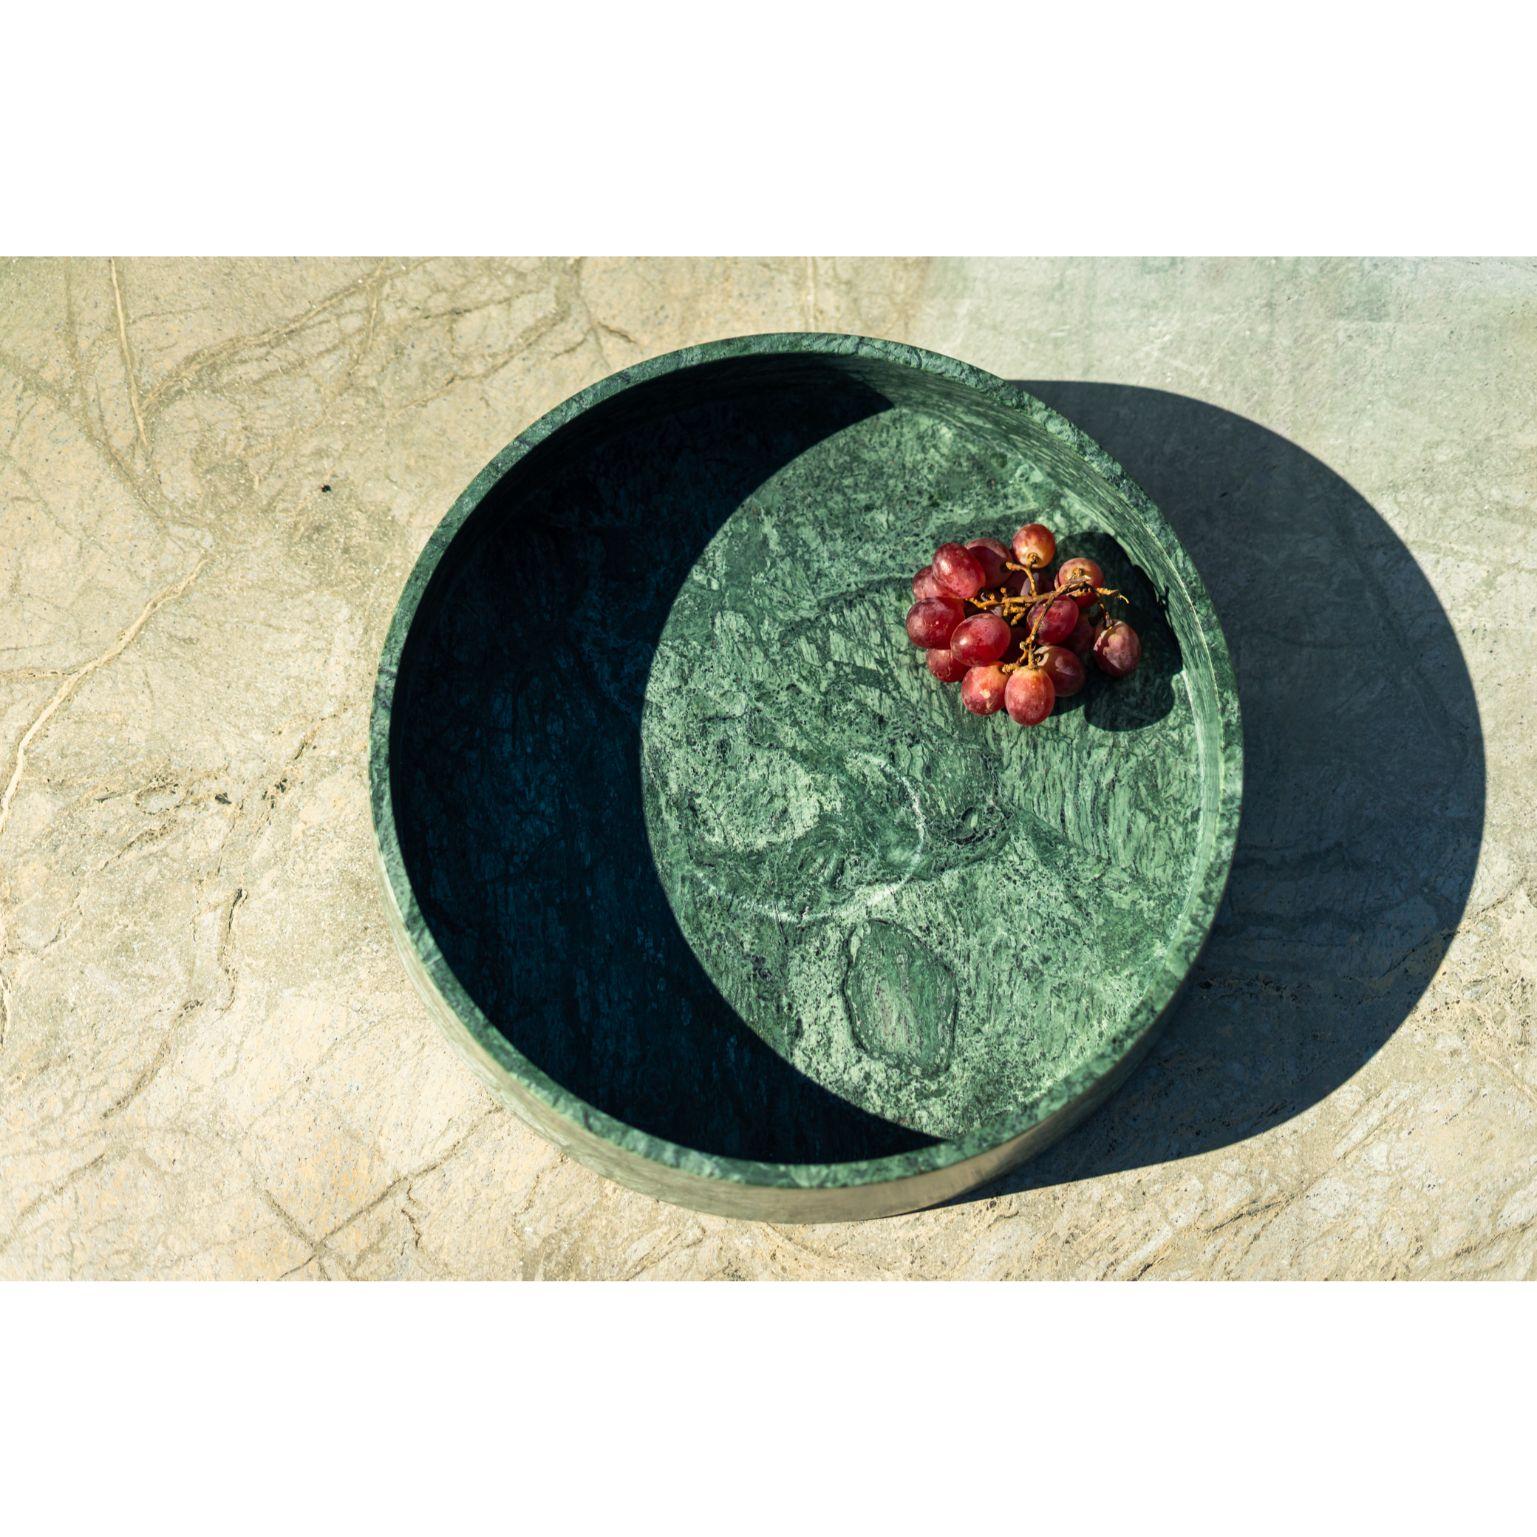 Plumb marble tray - Small by Essenzia
Materials: India green
Dimensions: 30 x 30 cm

Also available: Pele de tigre, estremoz white, carrara, rosa portugal

Simple and functional object with a timeless elegance that can be used to place fruit